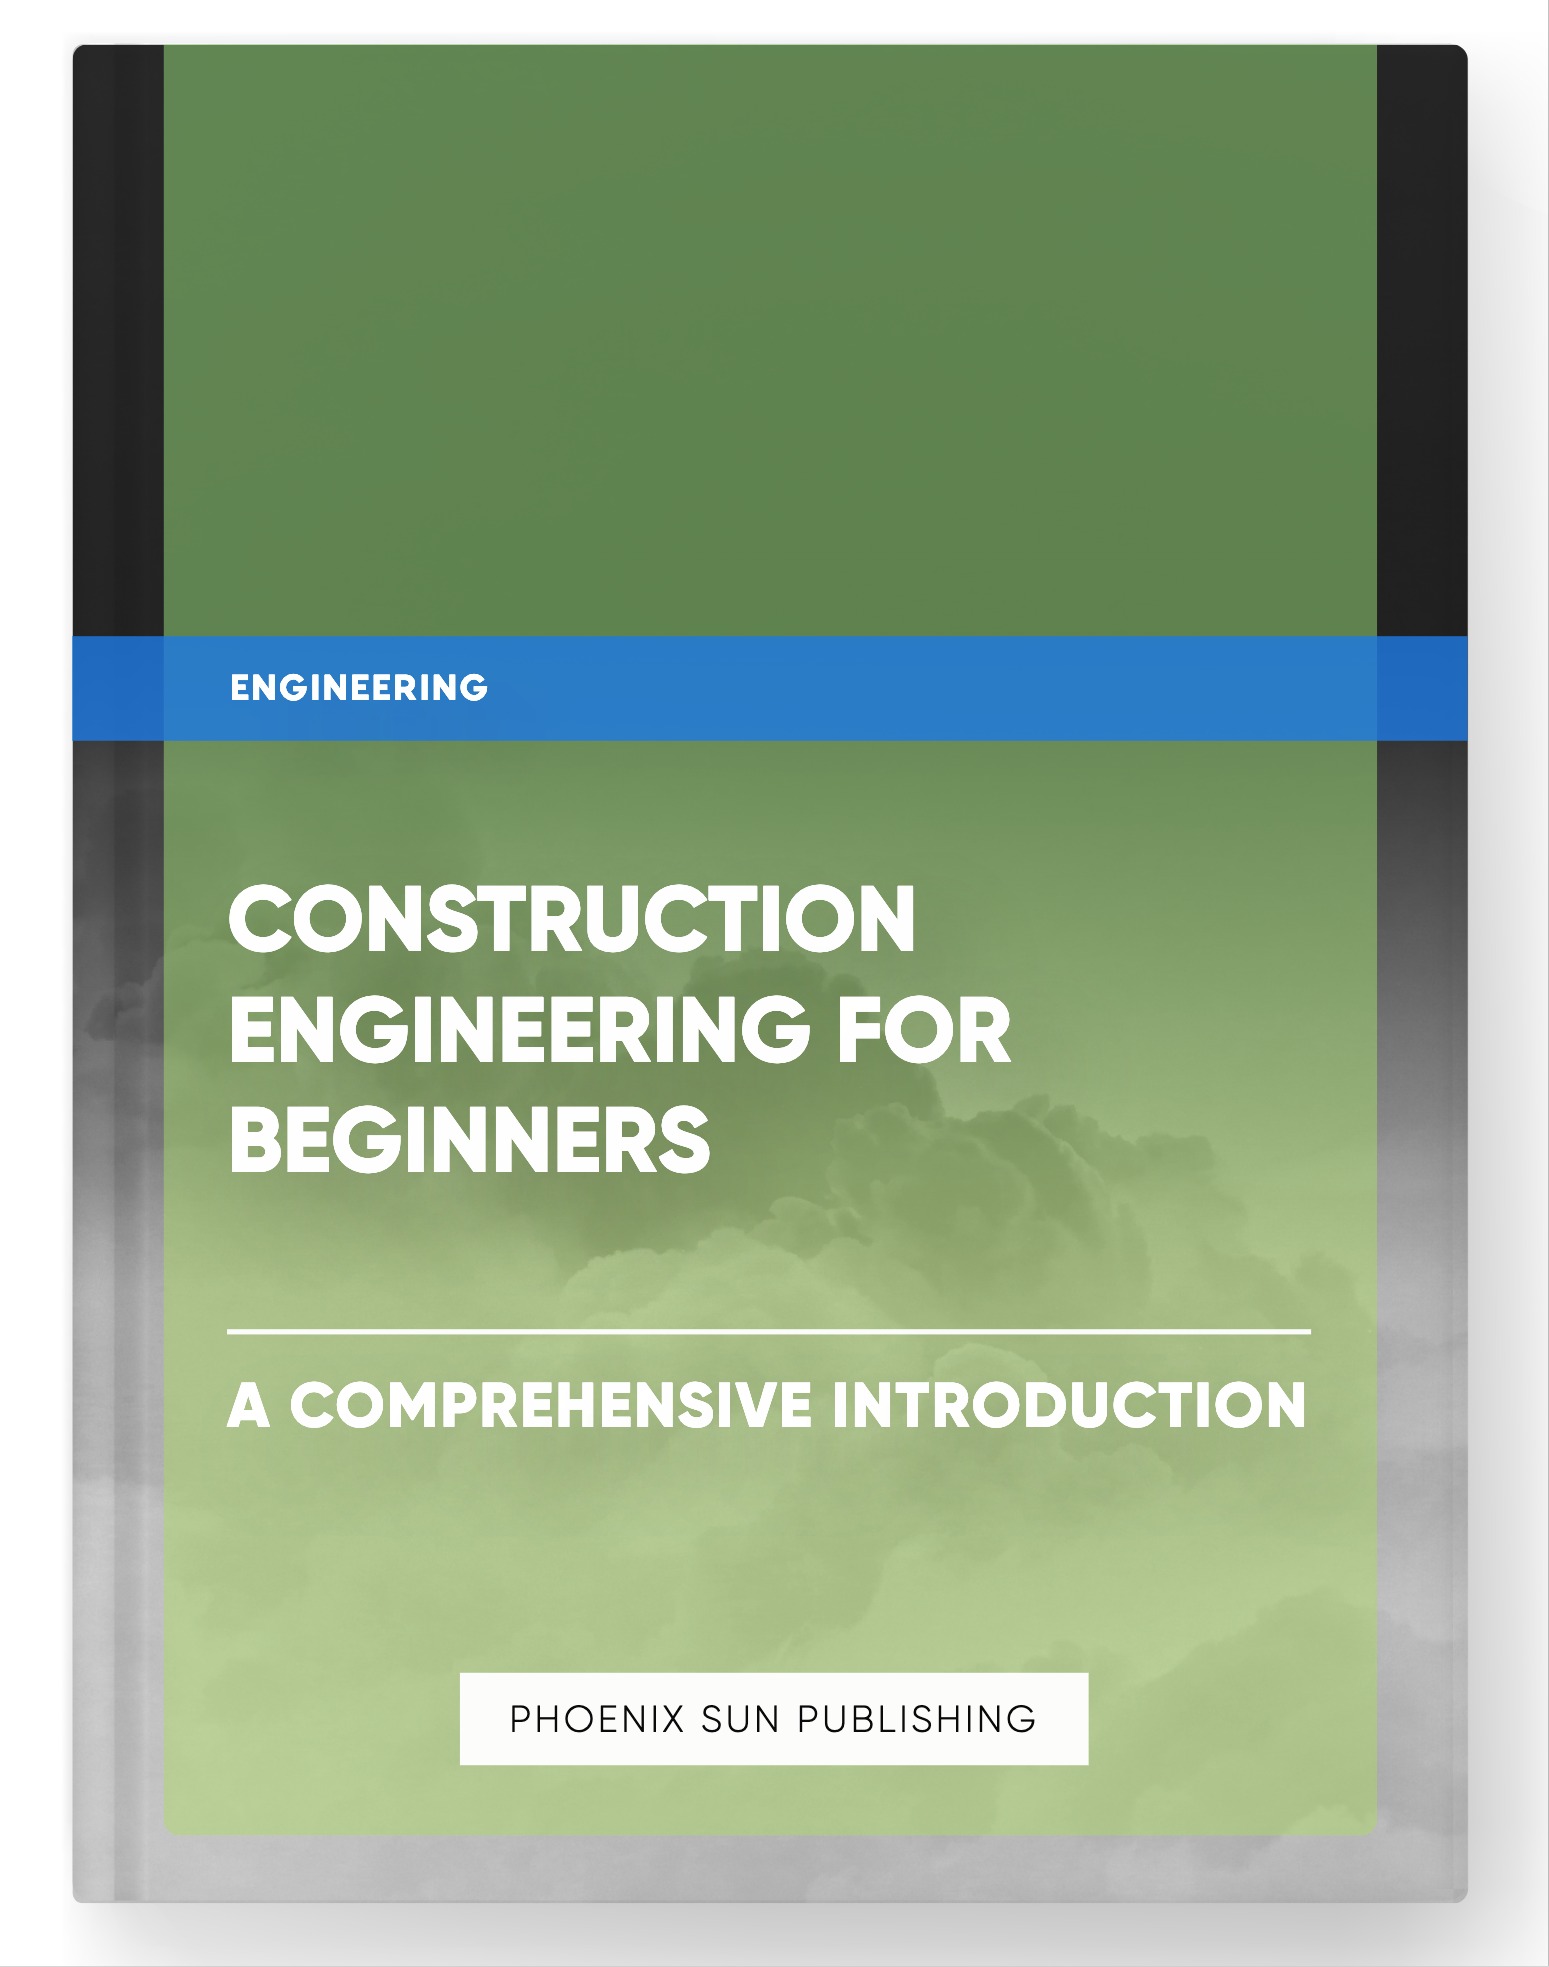 Construction Engineering for Beginners – A Comprehensive Introduction